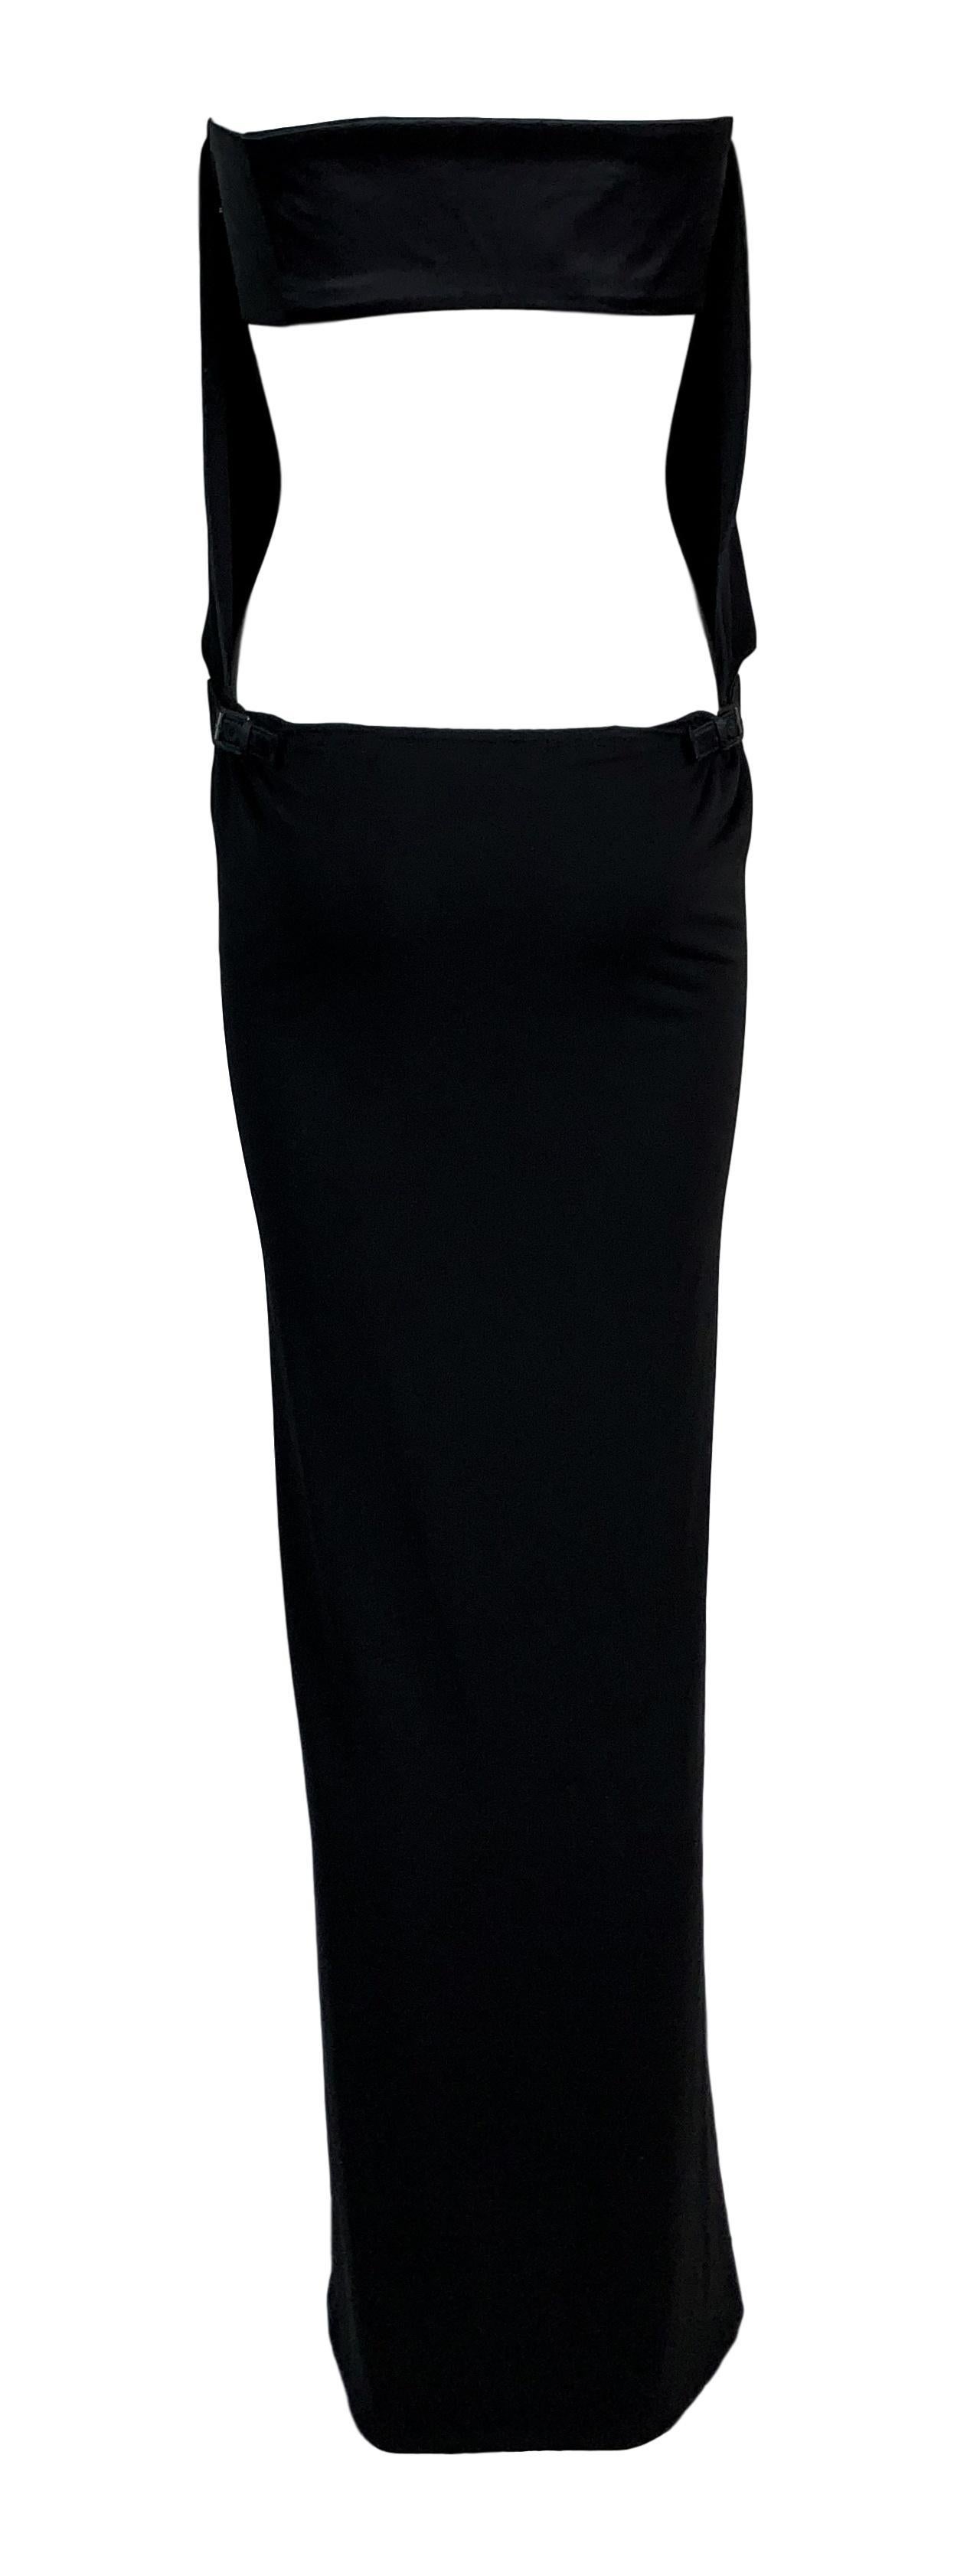 F/W 2001 Gucci Tom Ford Black Cut-Out Back Strapless Long Dress In Good Condition In Yukon, OK